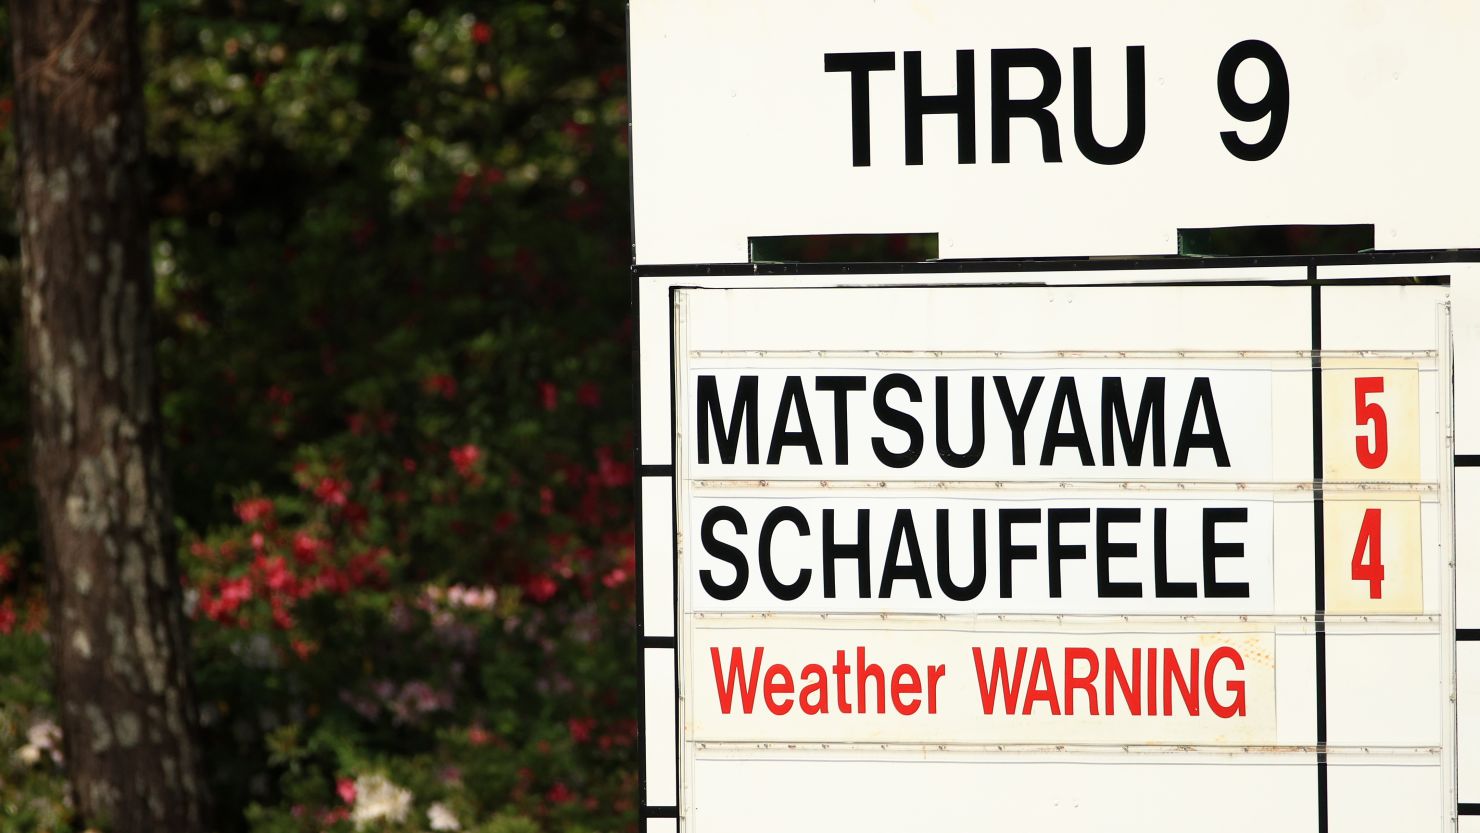 A detail of 'weather warning' signage on a leaderboard during the third round of the Masters.